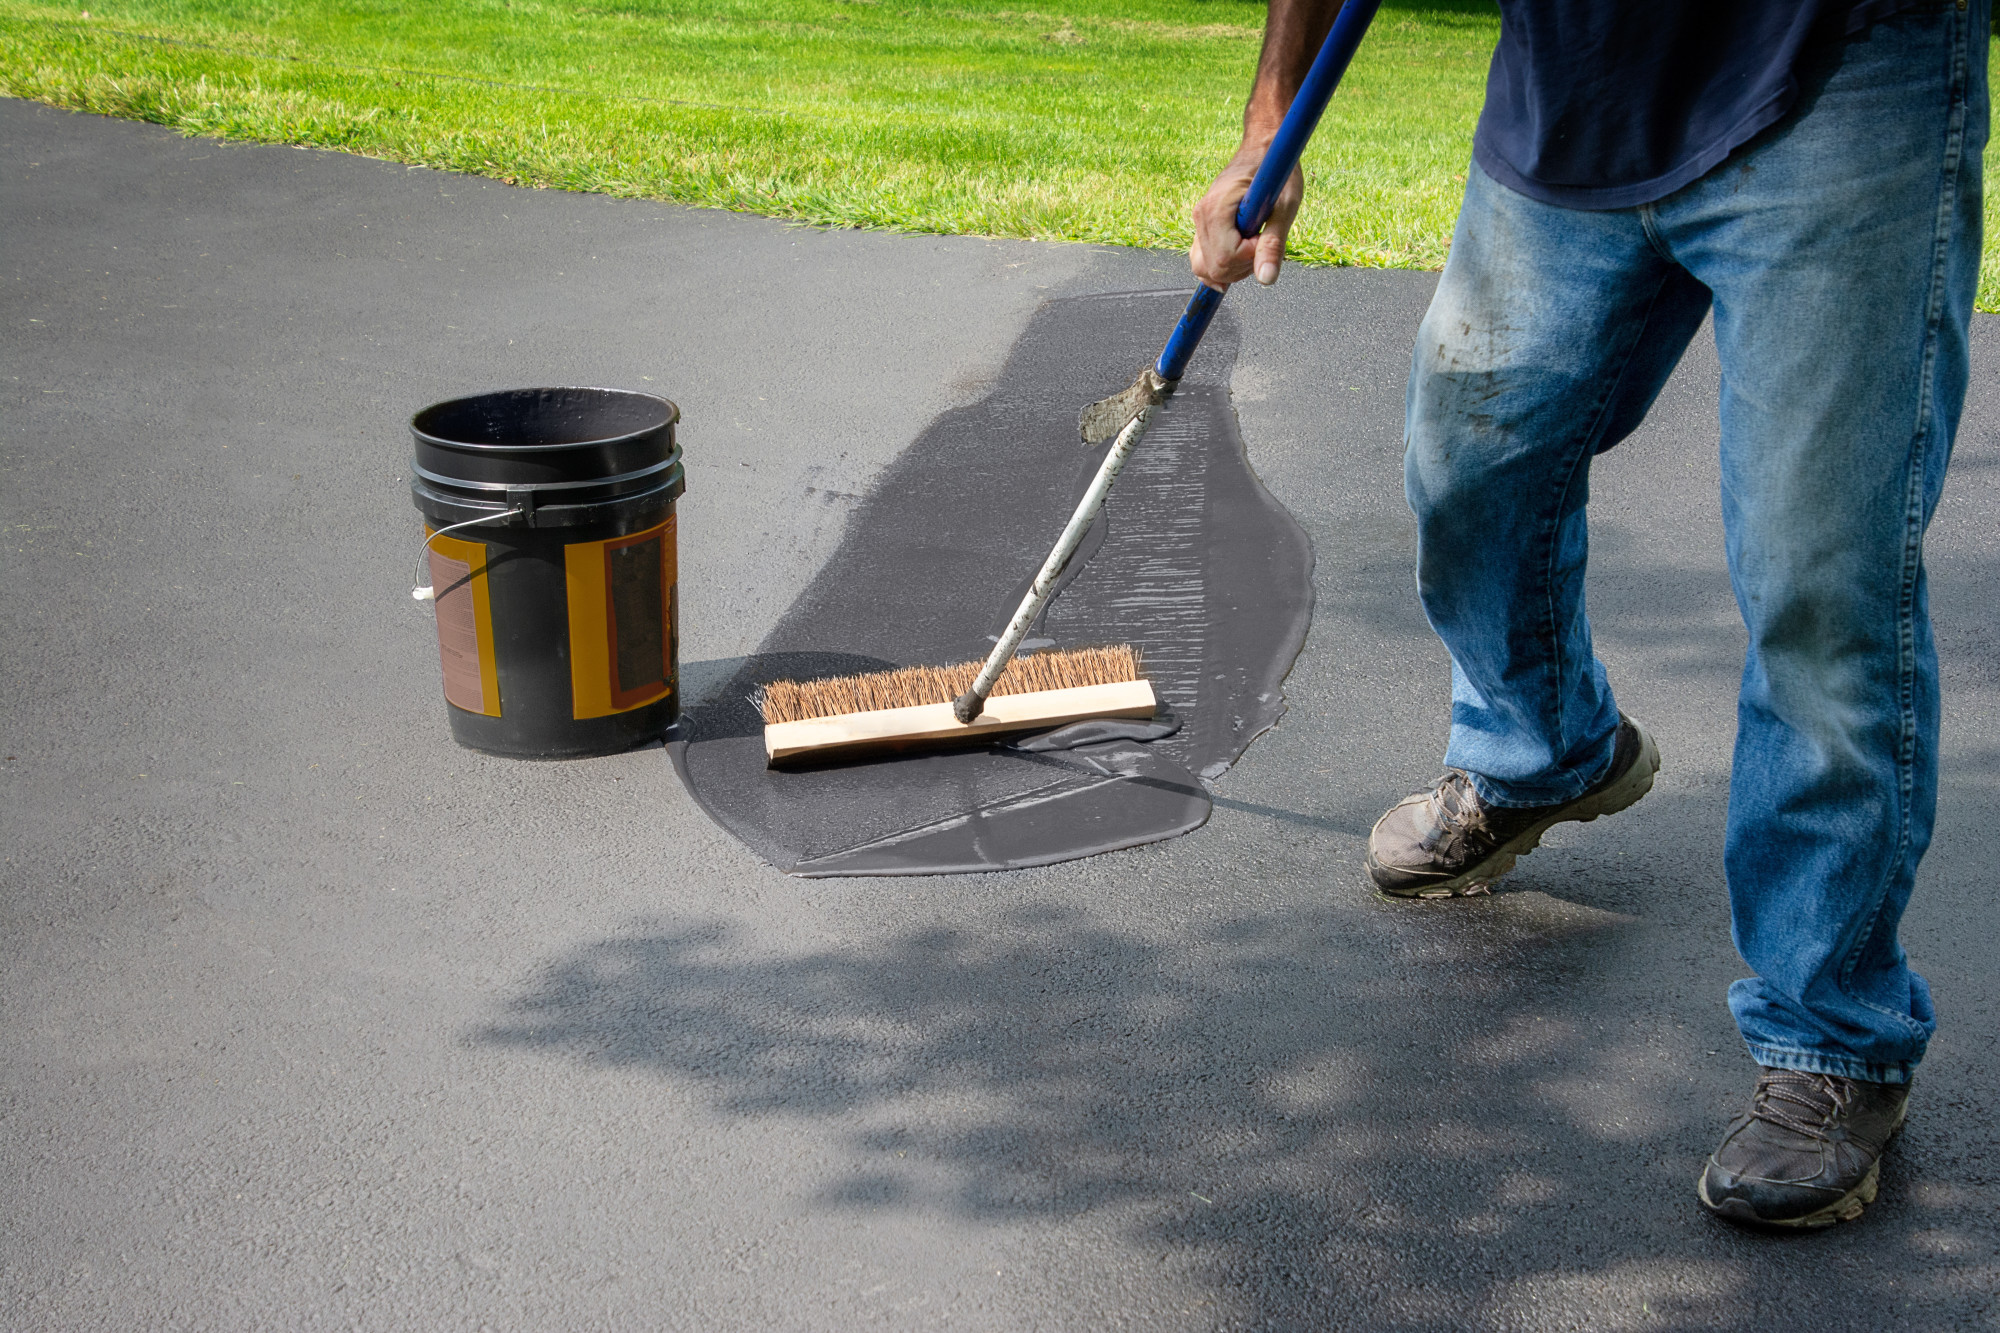 Do you want to get the most out of your repaved driveway at home? Here's what you can do to upgrade your residential driveway.